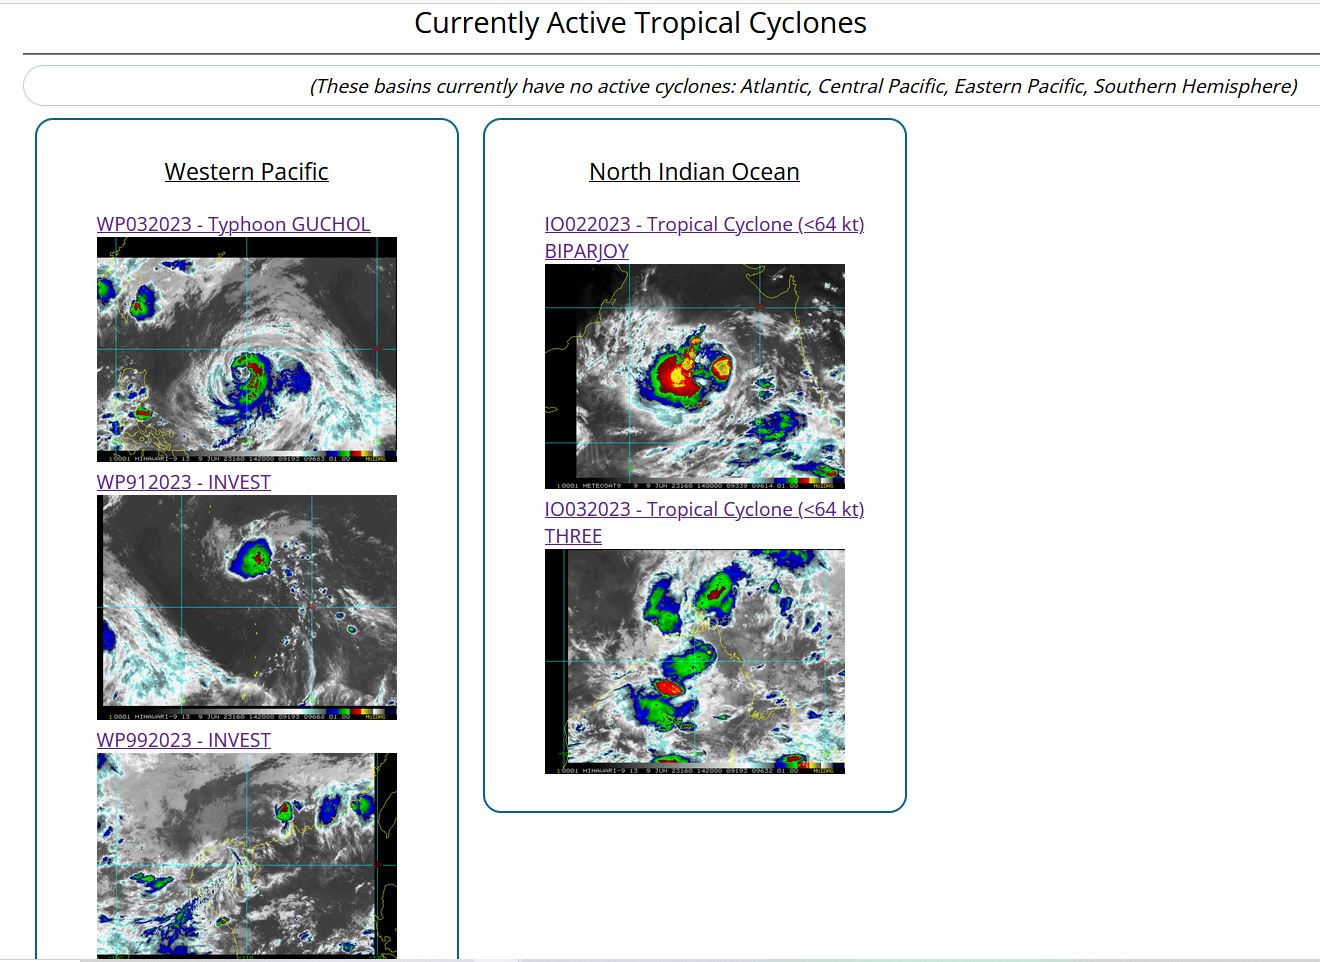 JTWC IS ISSUING 6HOURLY WARNINGS AND 3HOURLY SATELLITE BULLETINS ON TY 03W(GUCHOL), TC 02A(BIPARJOY) AND TC 03B.